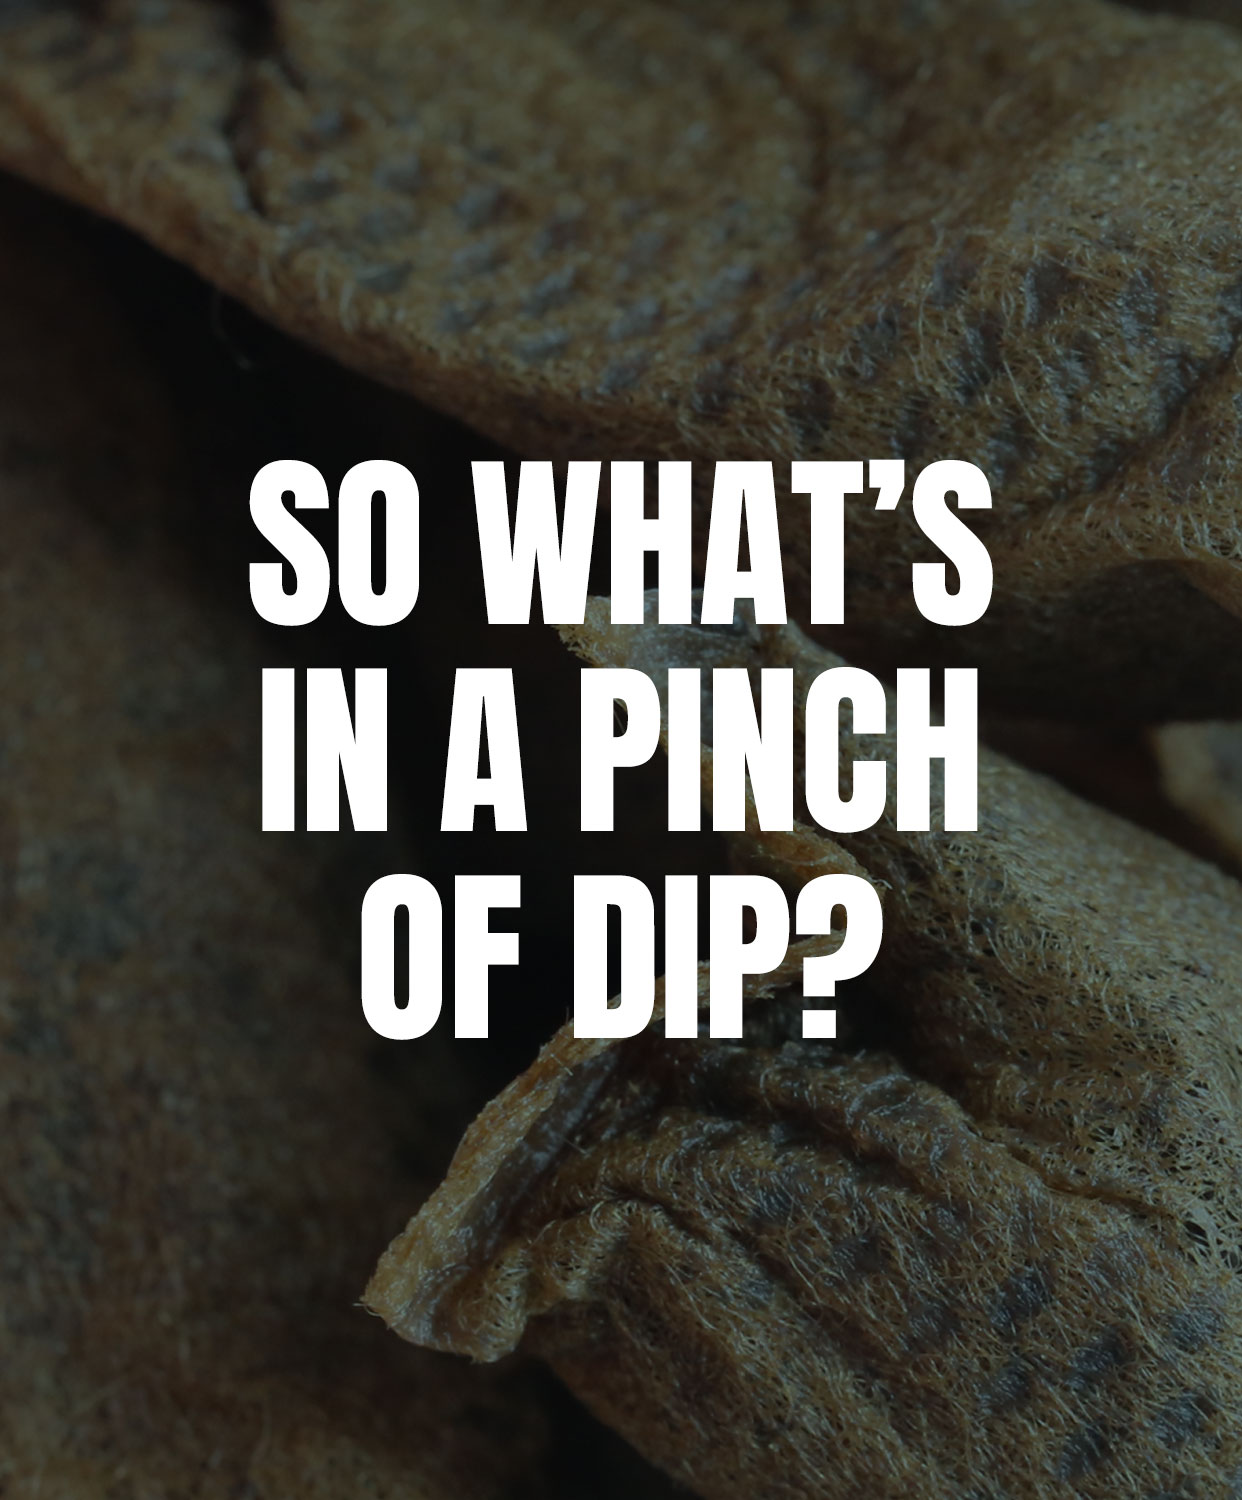 so what's in a pinch of dip?